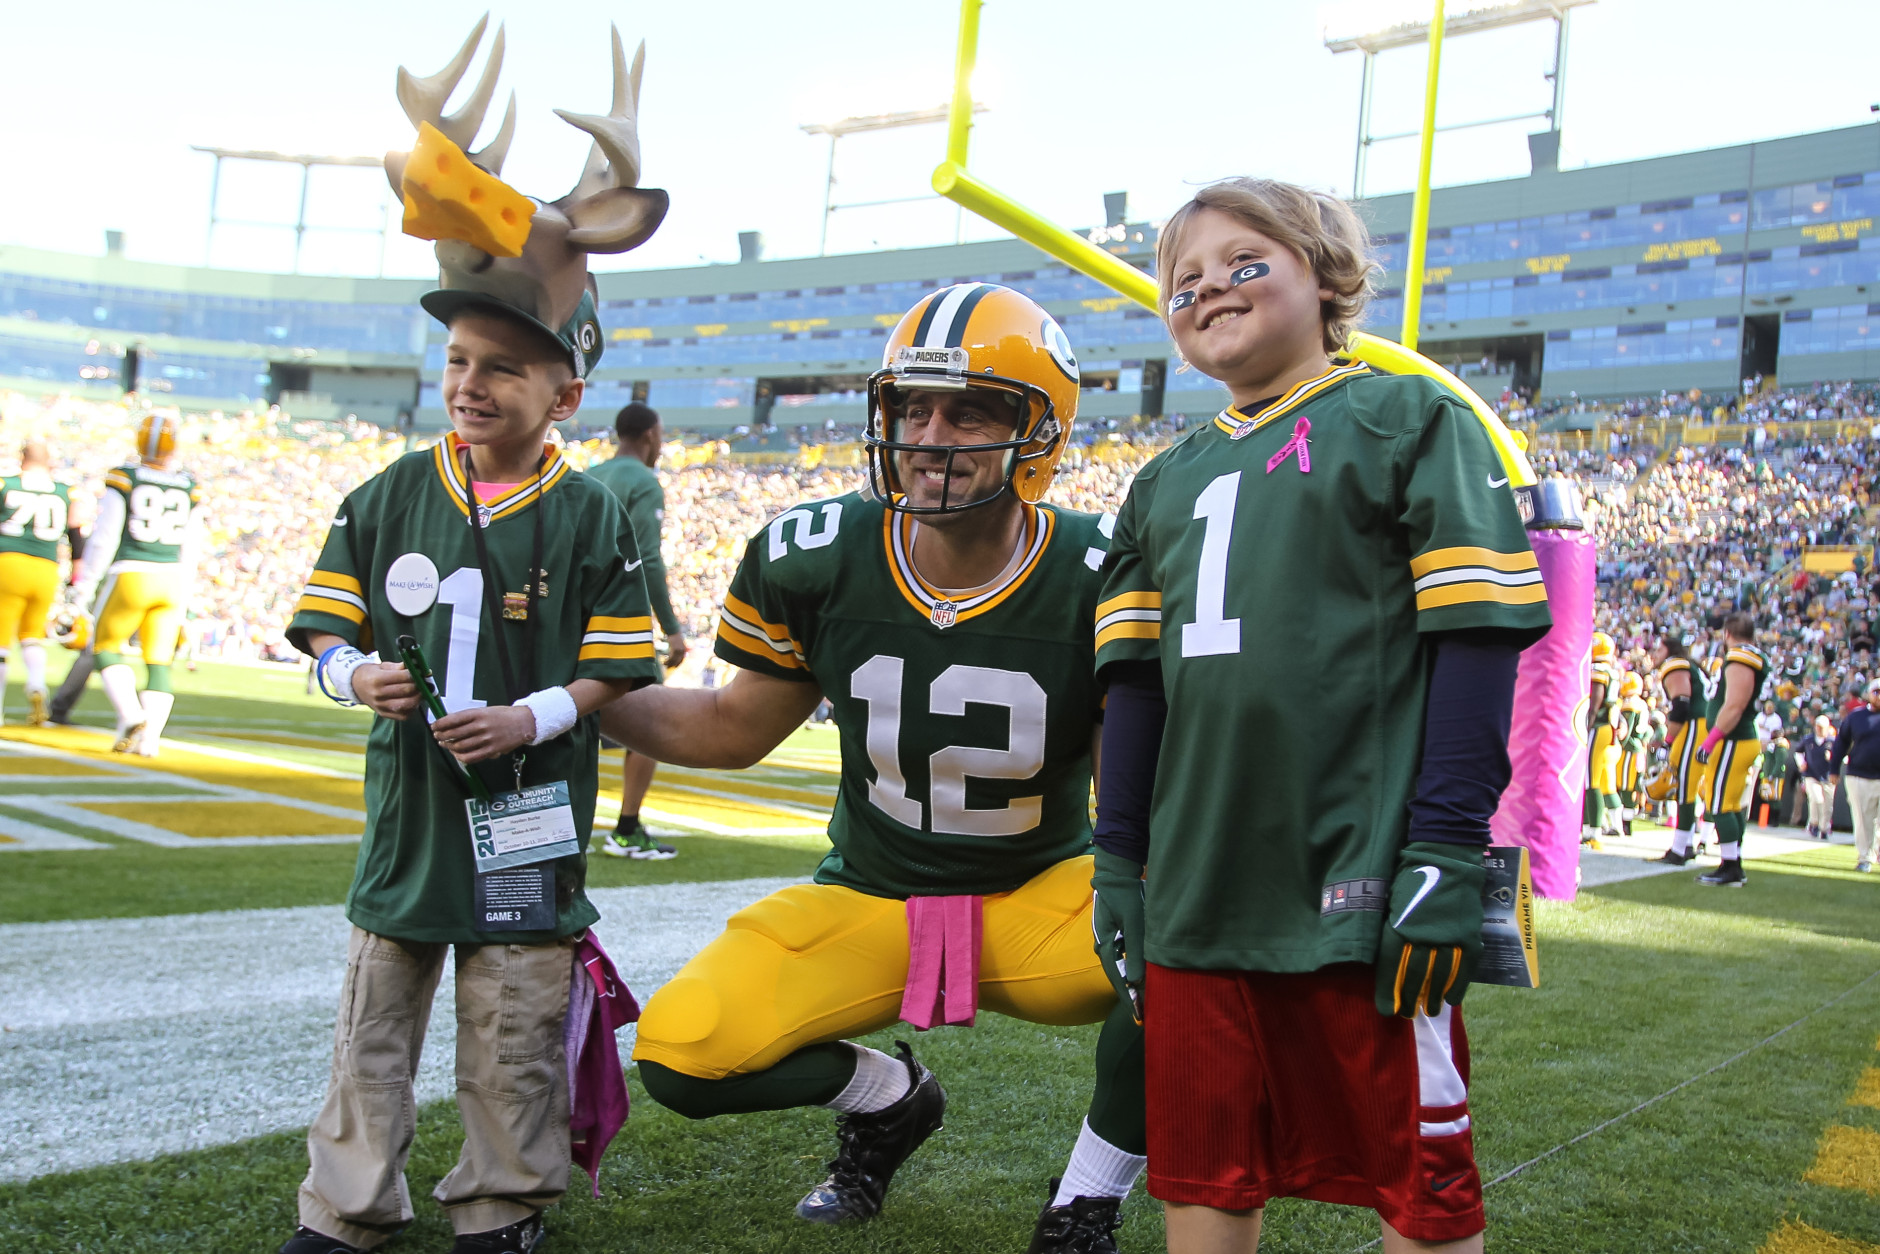 GREEN BAY, WI - OCTOBER 11:  Quarterback Aaron Rodgers #12 of the Green Bay Packers poses with fans prior to the game against the St. Louis Rams at Lambeau Field on October 11, 2015 in Green Bay, Wisconsin.  (Photo by Mike McGinnis/Getty Images)